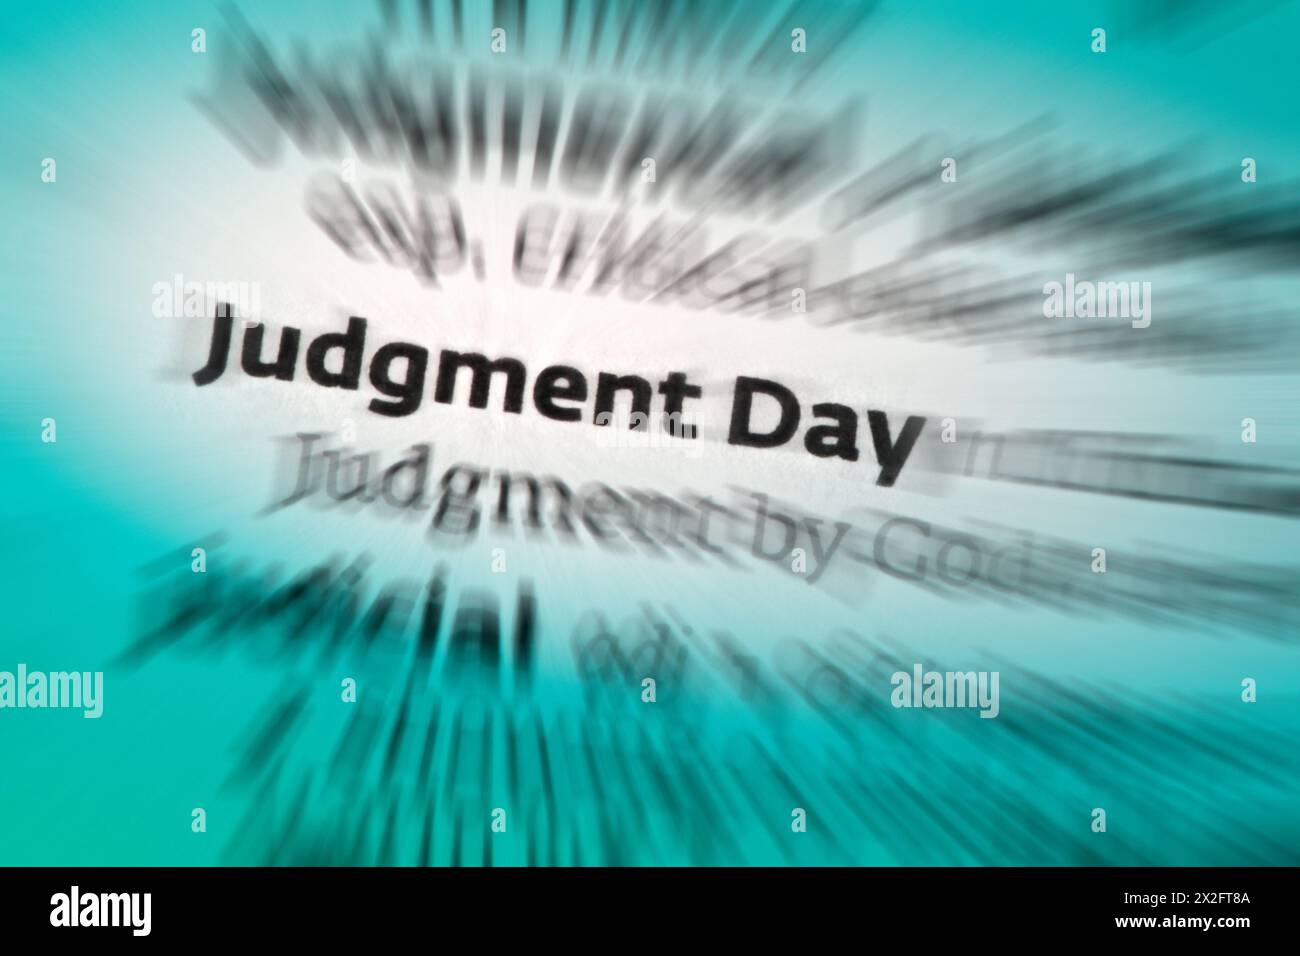 Judgment Day - the time of the Last Judgment; the end of the world. Stock Photo